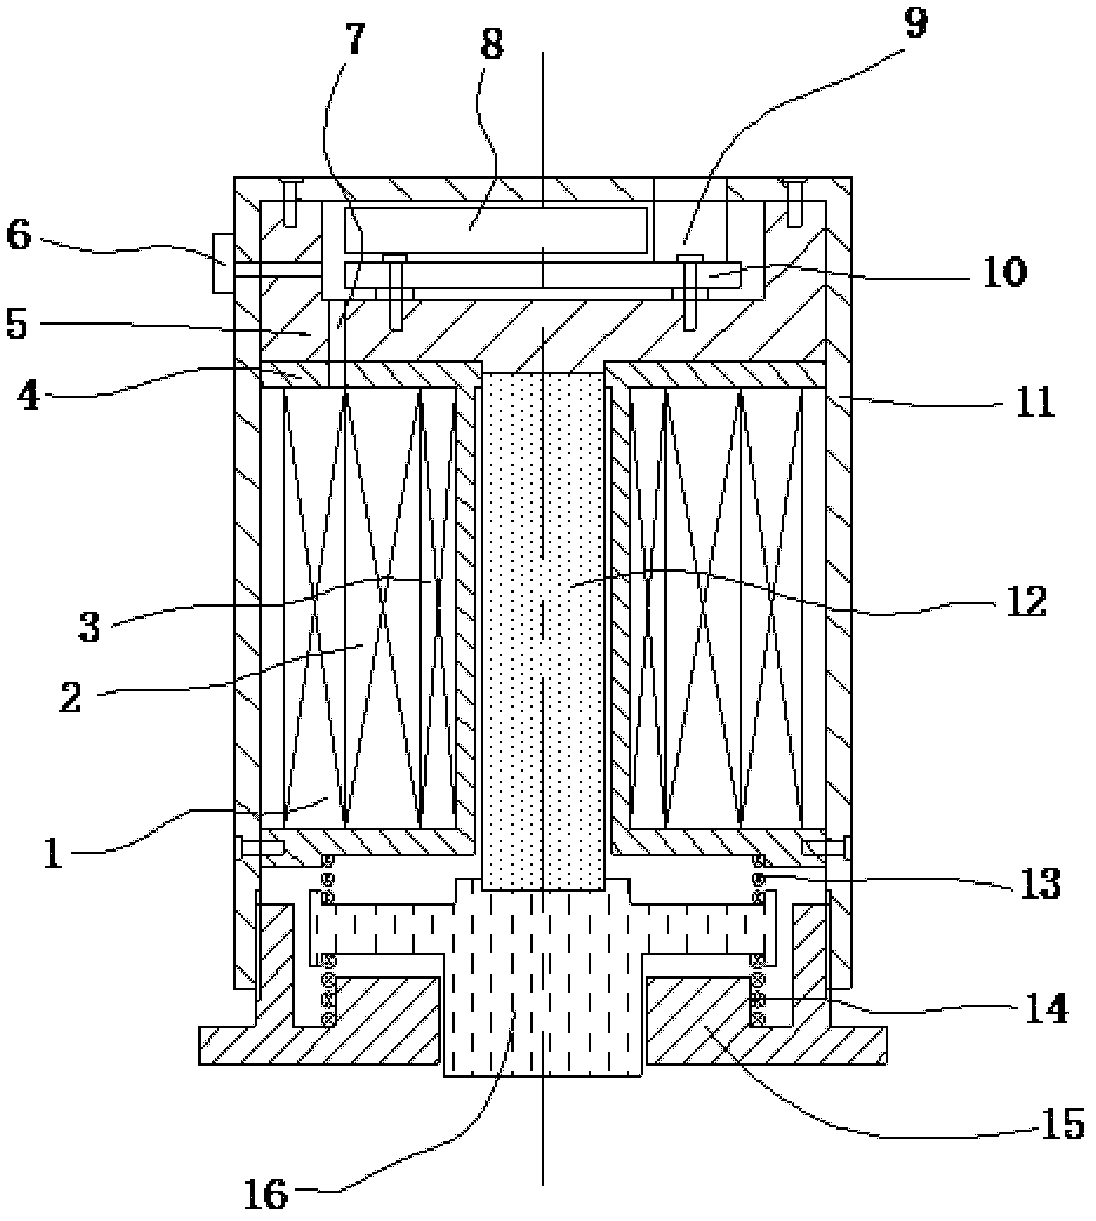 Shock excitation and measurement integrated system based on giant magnetostrictive material